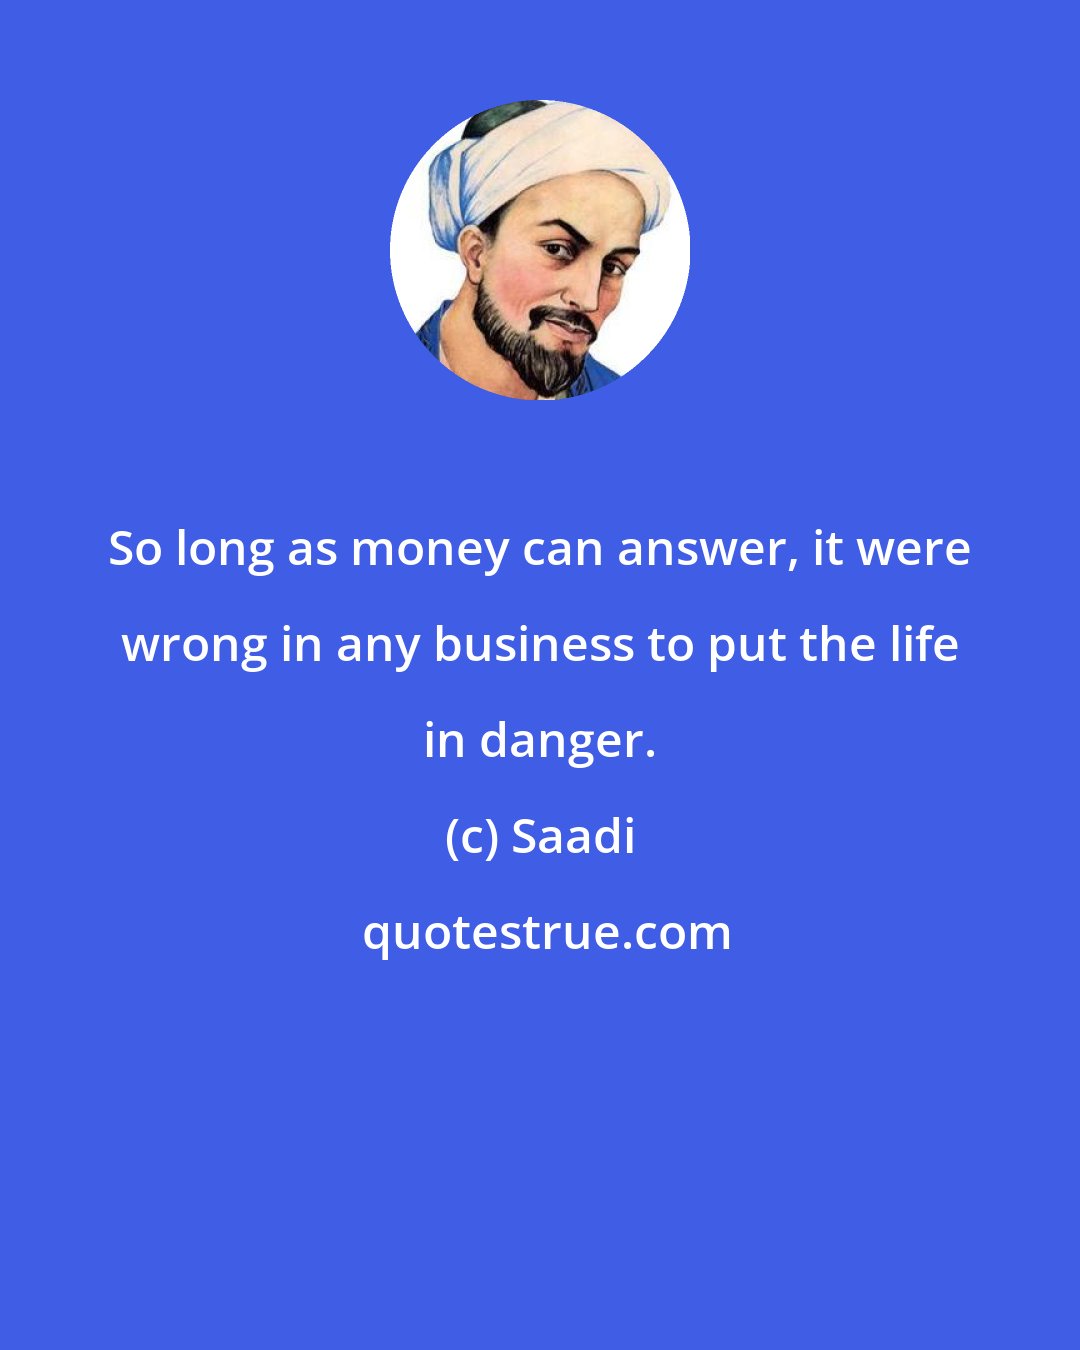 Saadi: So long as money can answer, it were wrong in any business to put the life in danger.